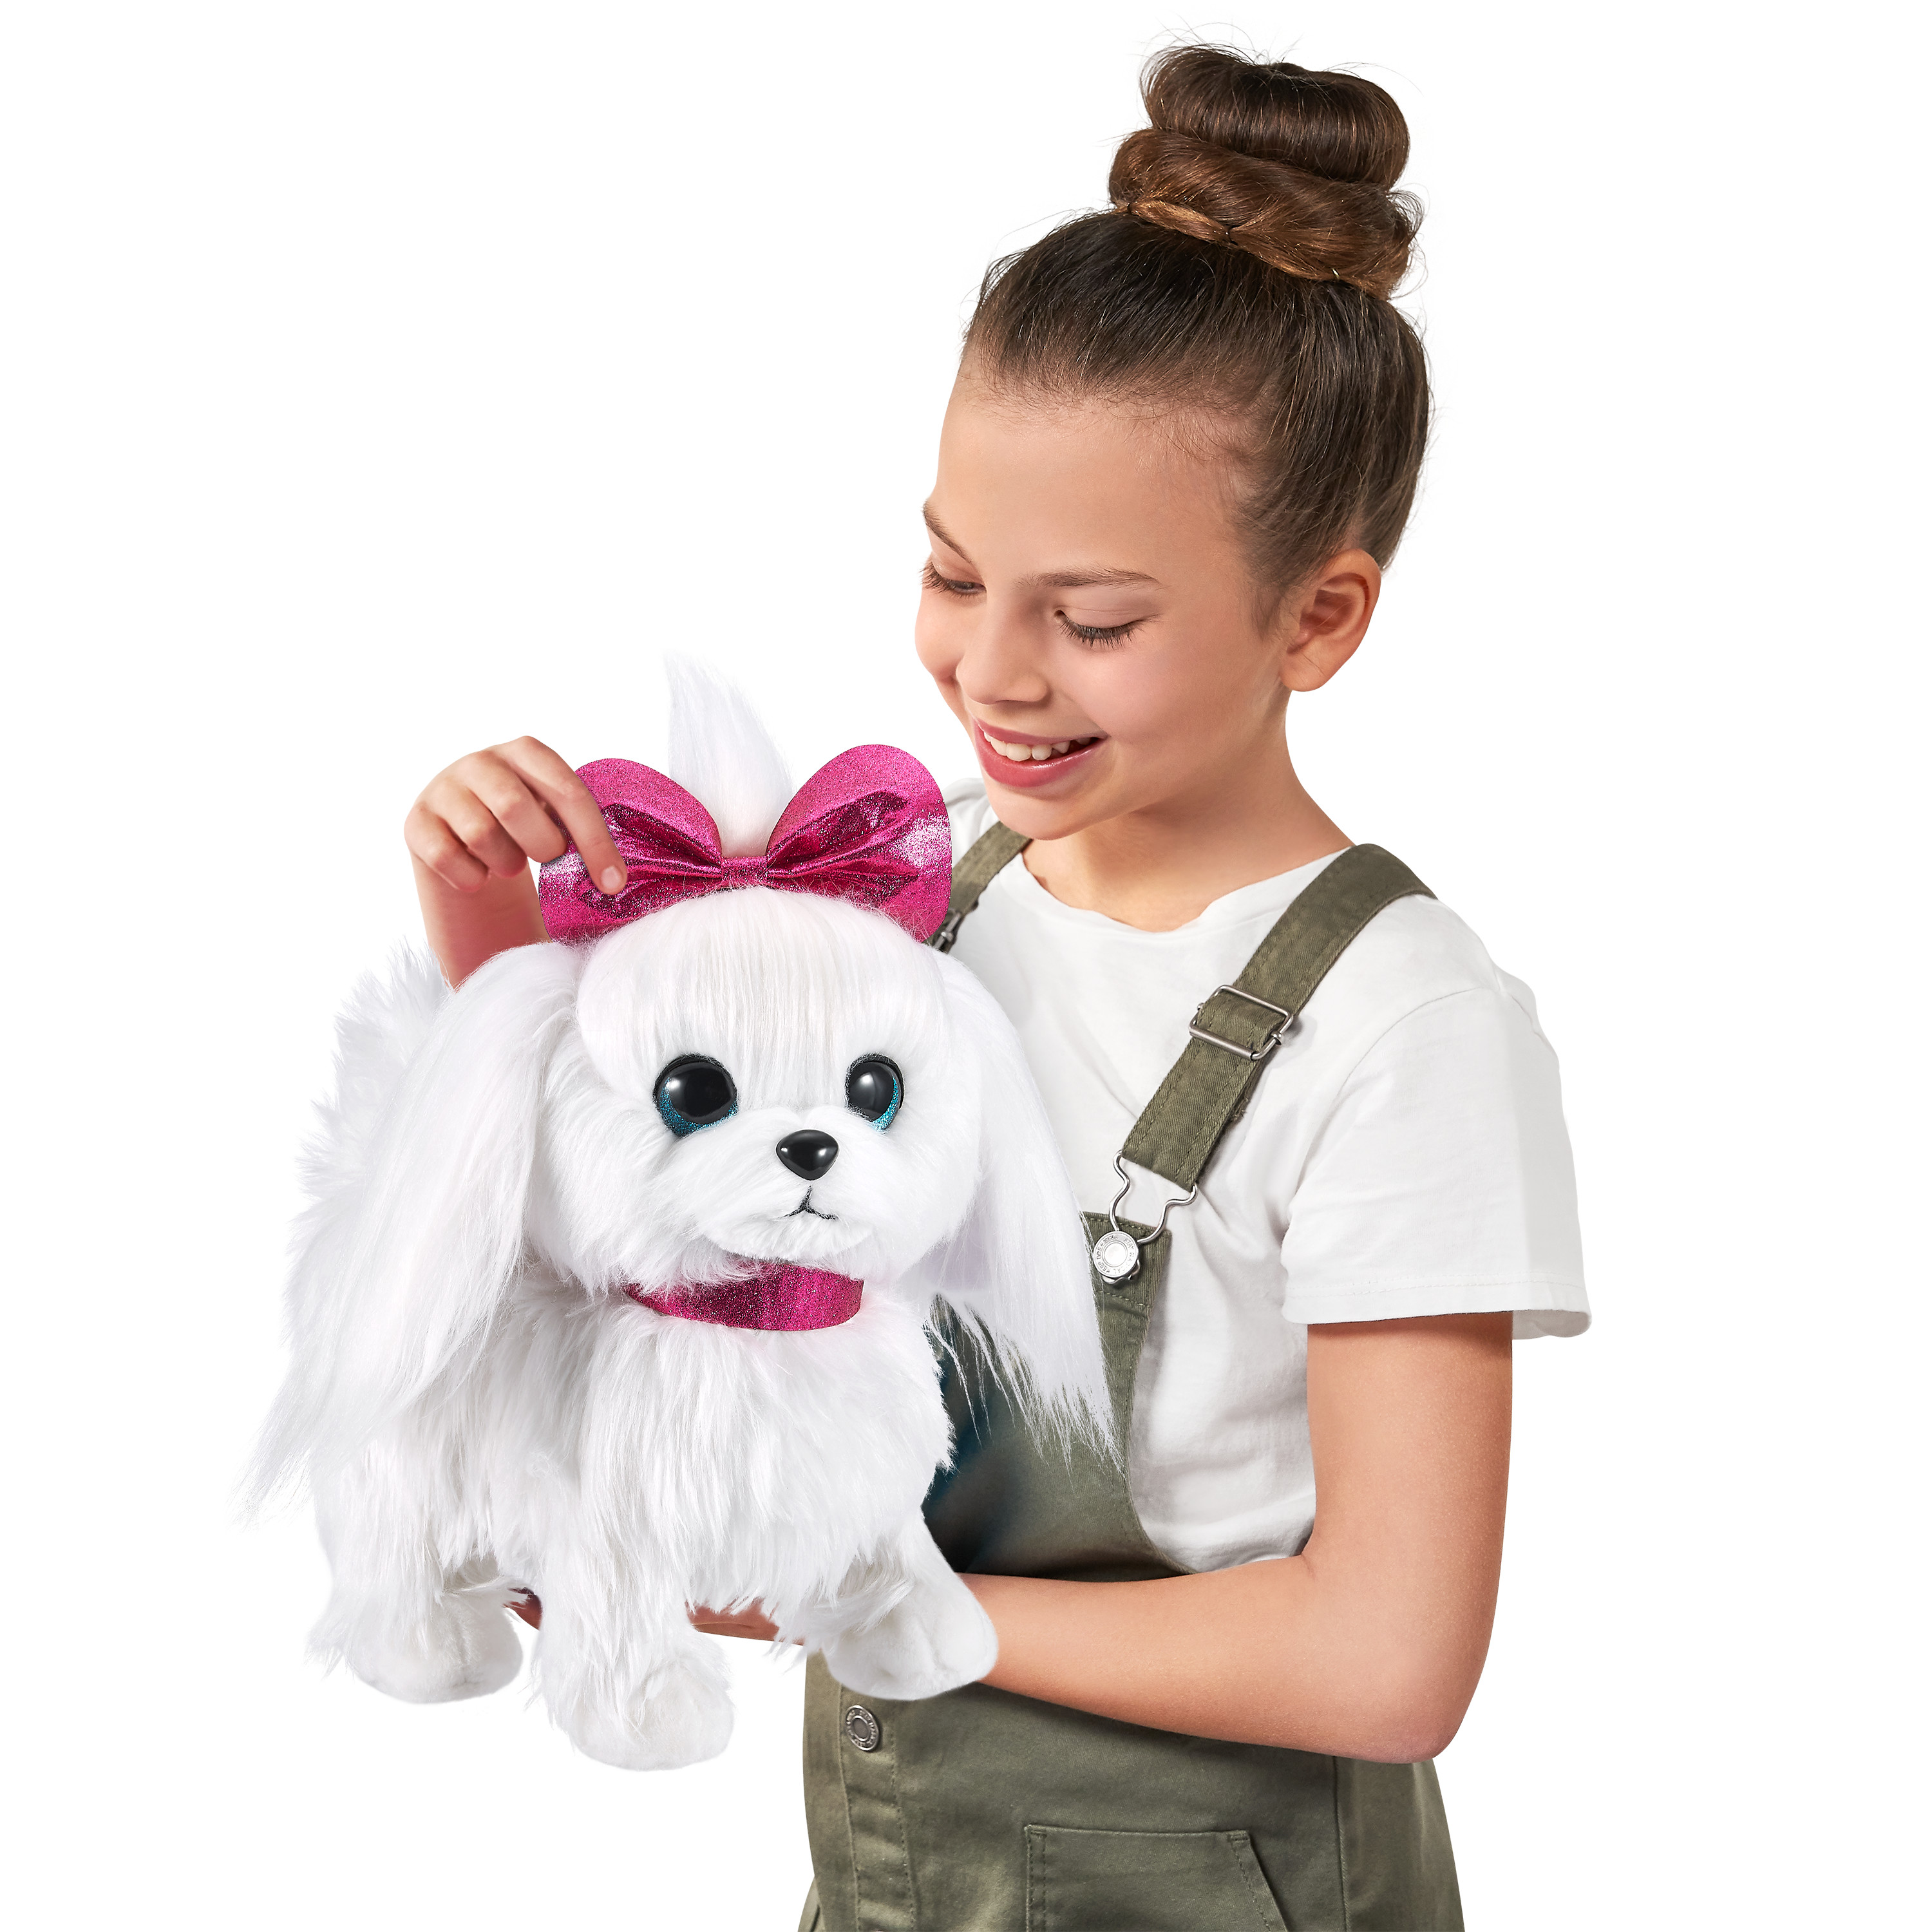 Pets Alive Lil' Paw The Walking Puppy by ZURU Interactive Dog That Walk, Waggle, and Barks, Interactive Plush Pet, Electronic Leash, Soft Toy for Kids and Girls - image 5 of 7